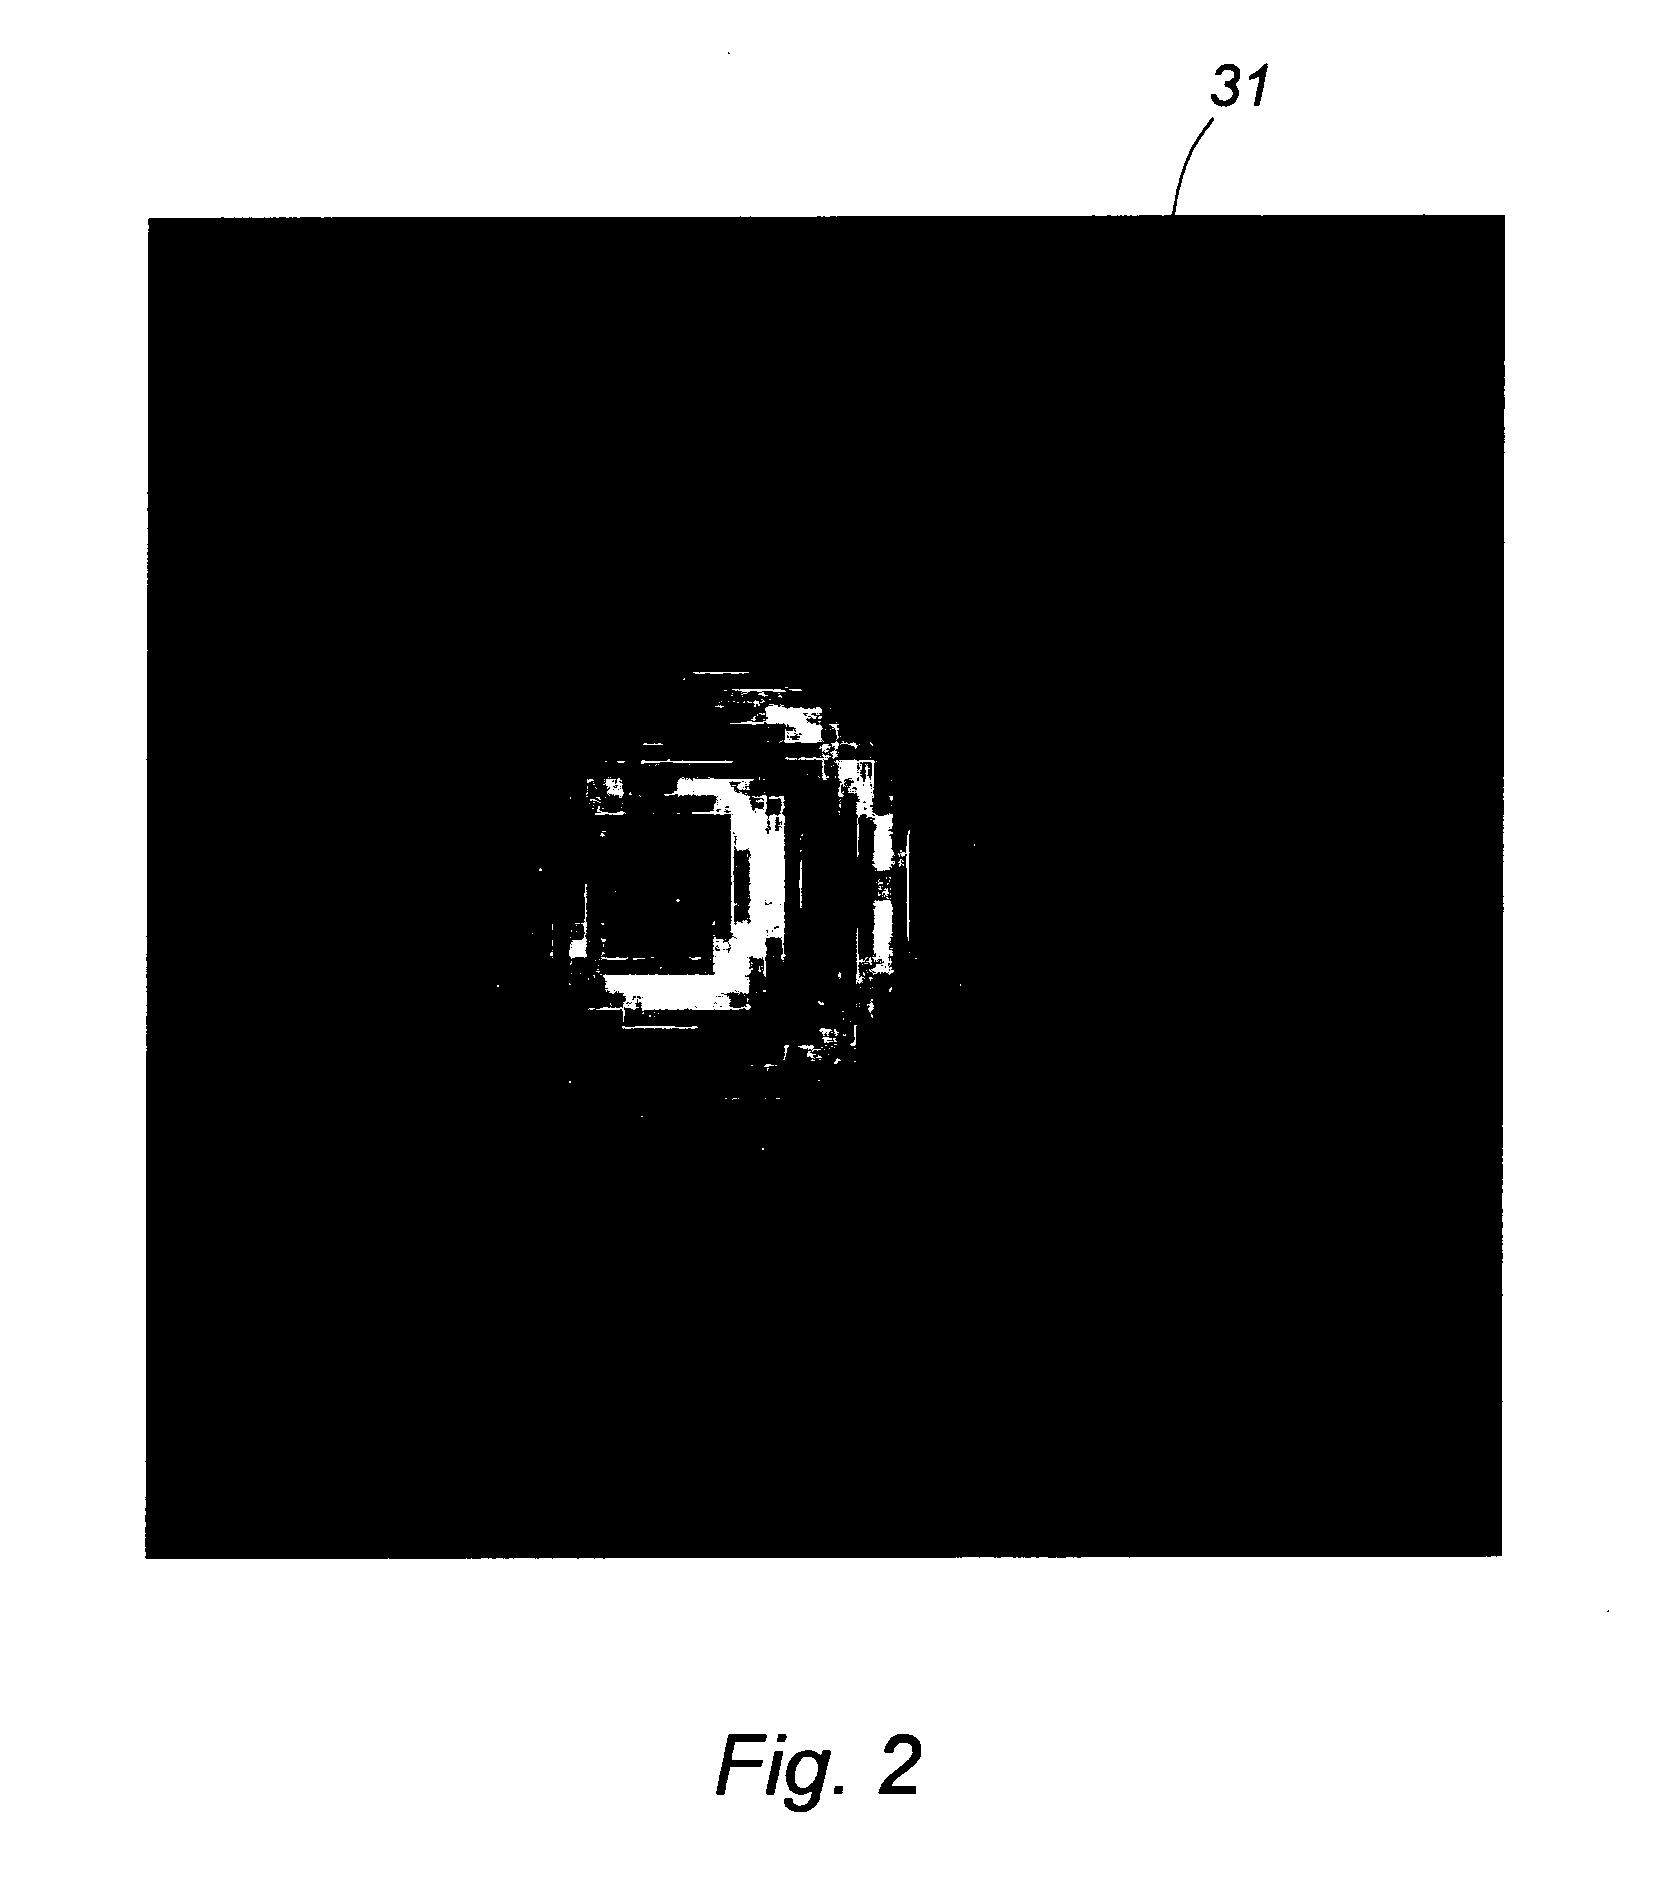 Object position and orientation detection system